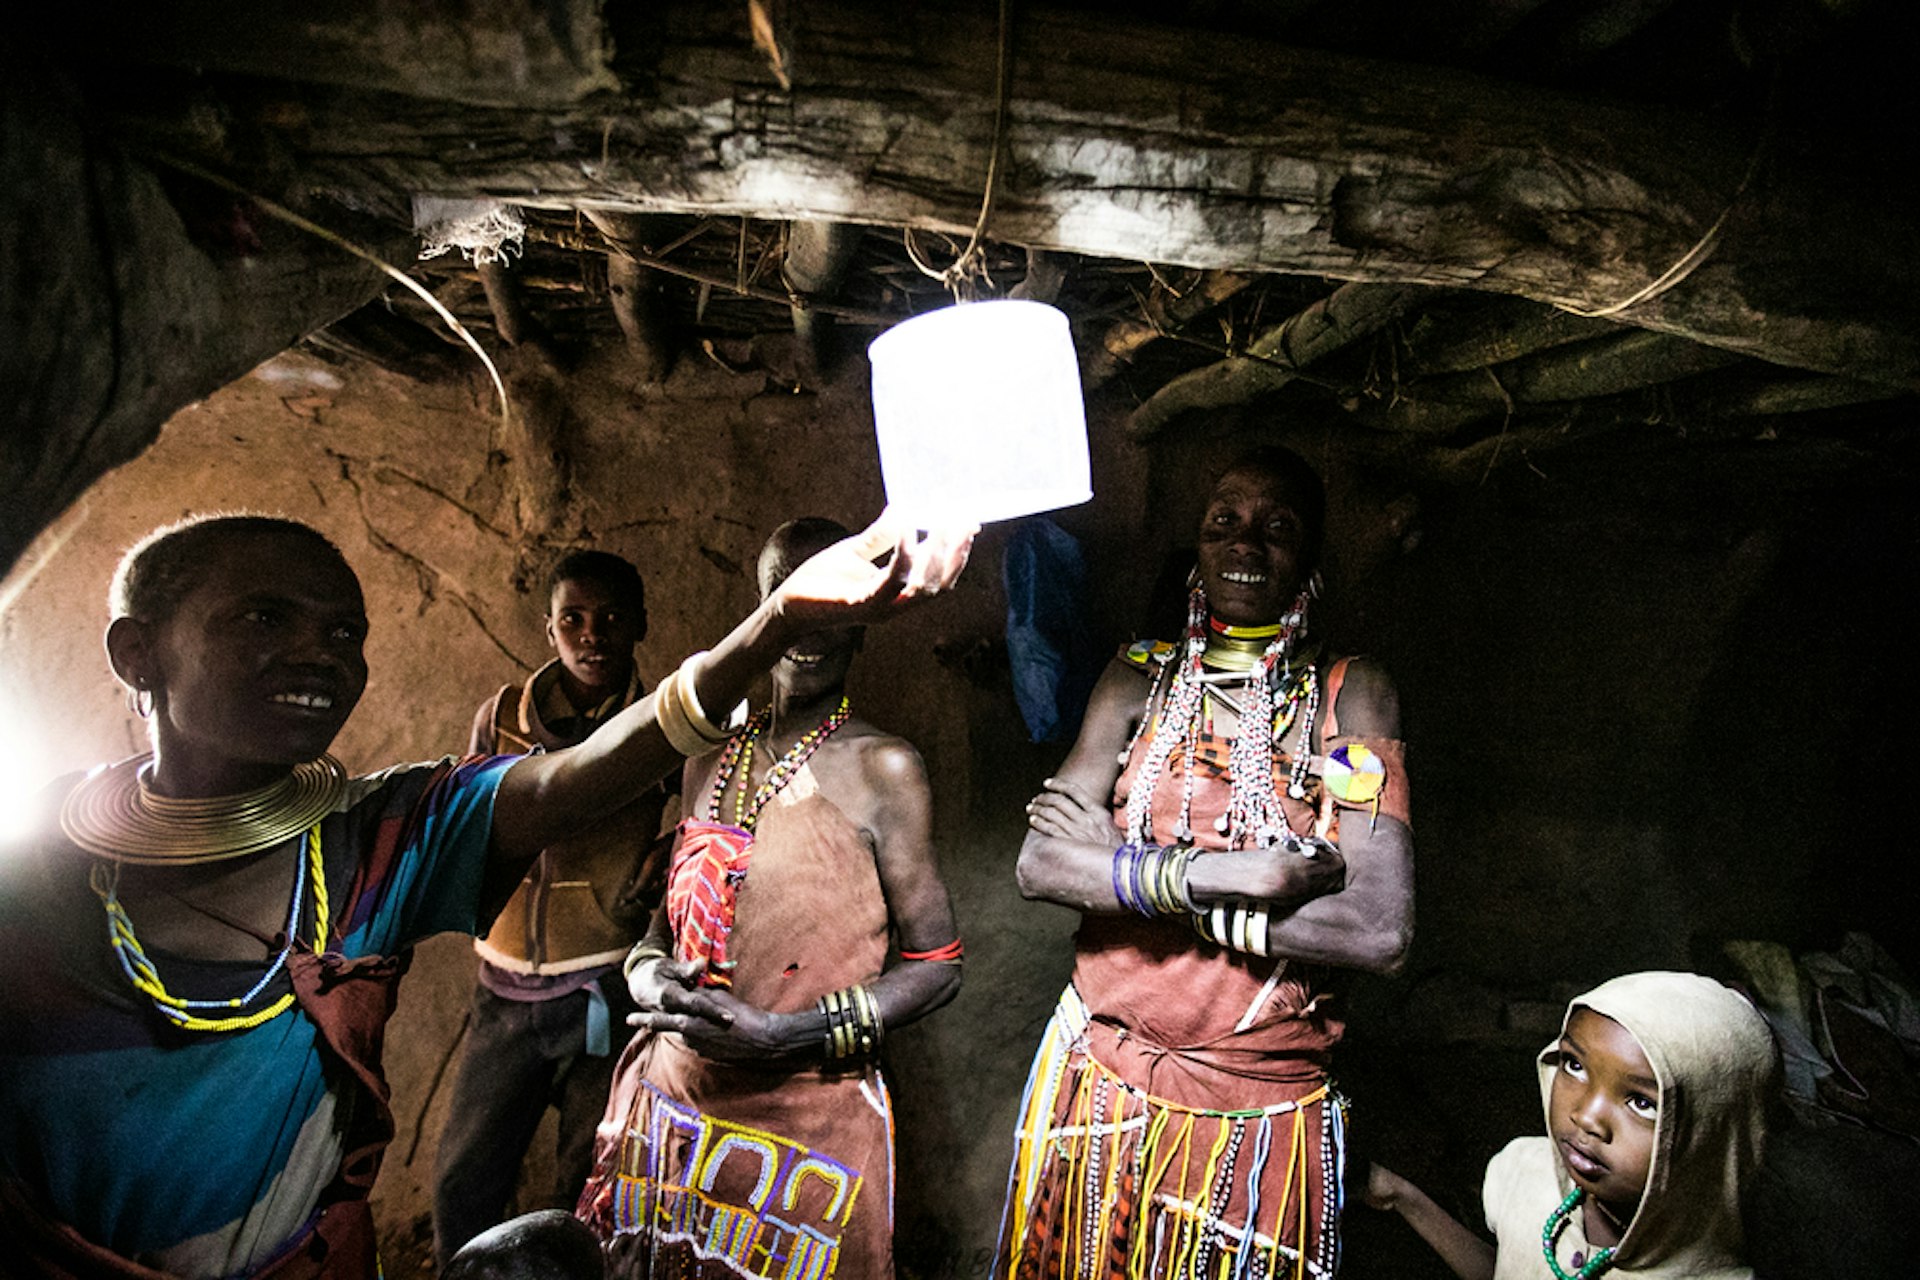 People in a dark space smile as someone holds up a small solar-powered light 